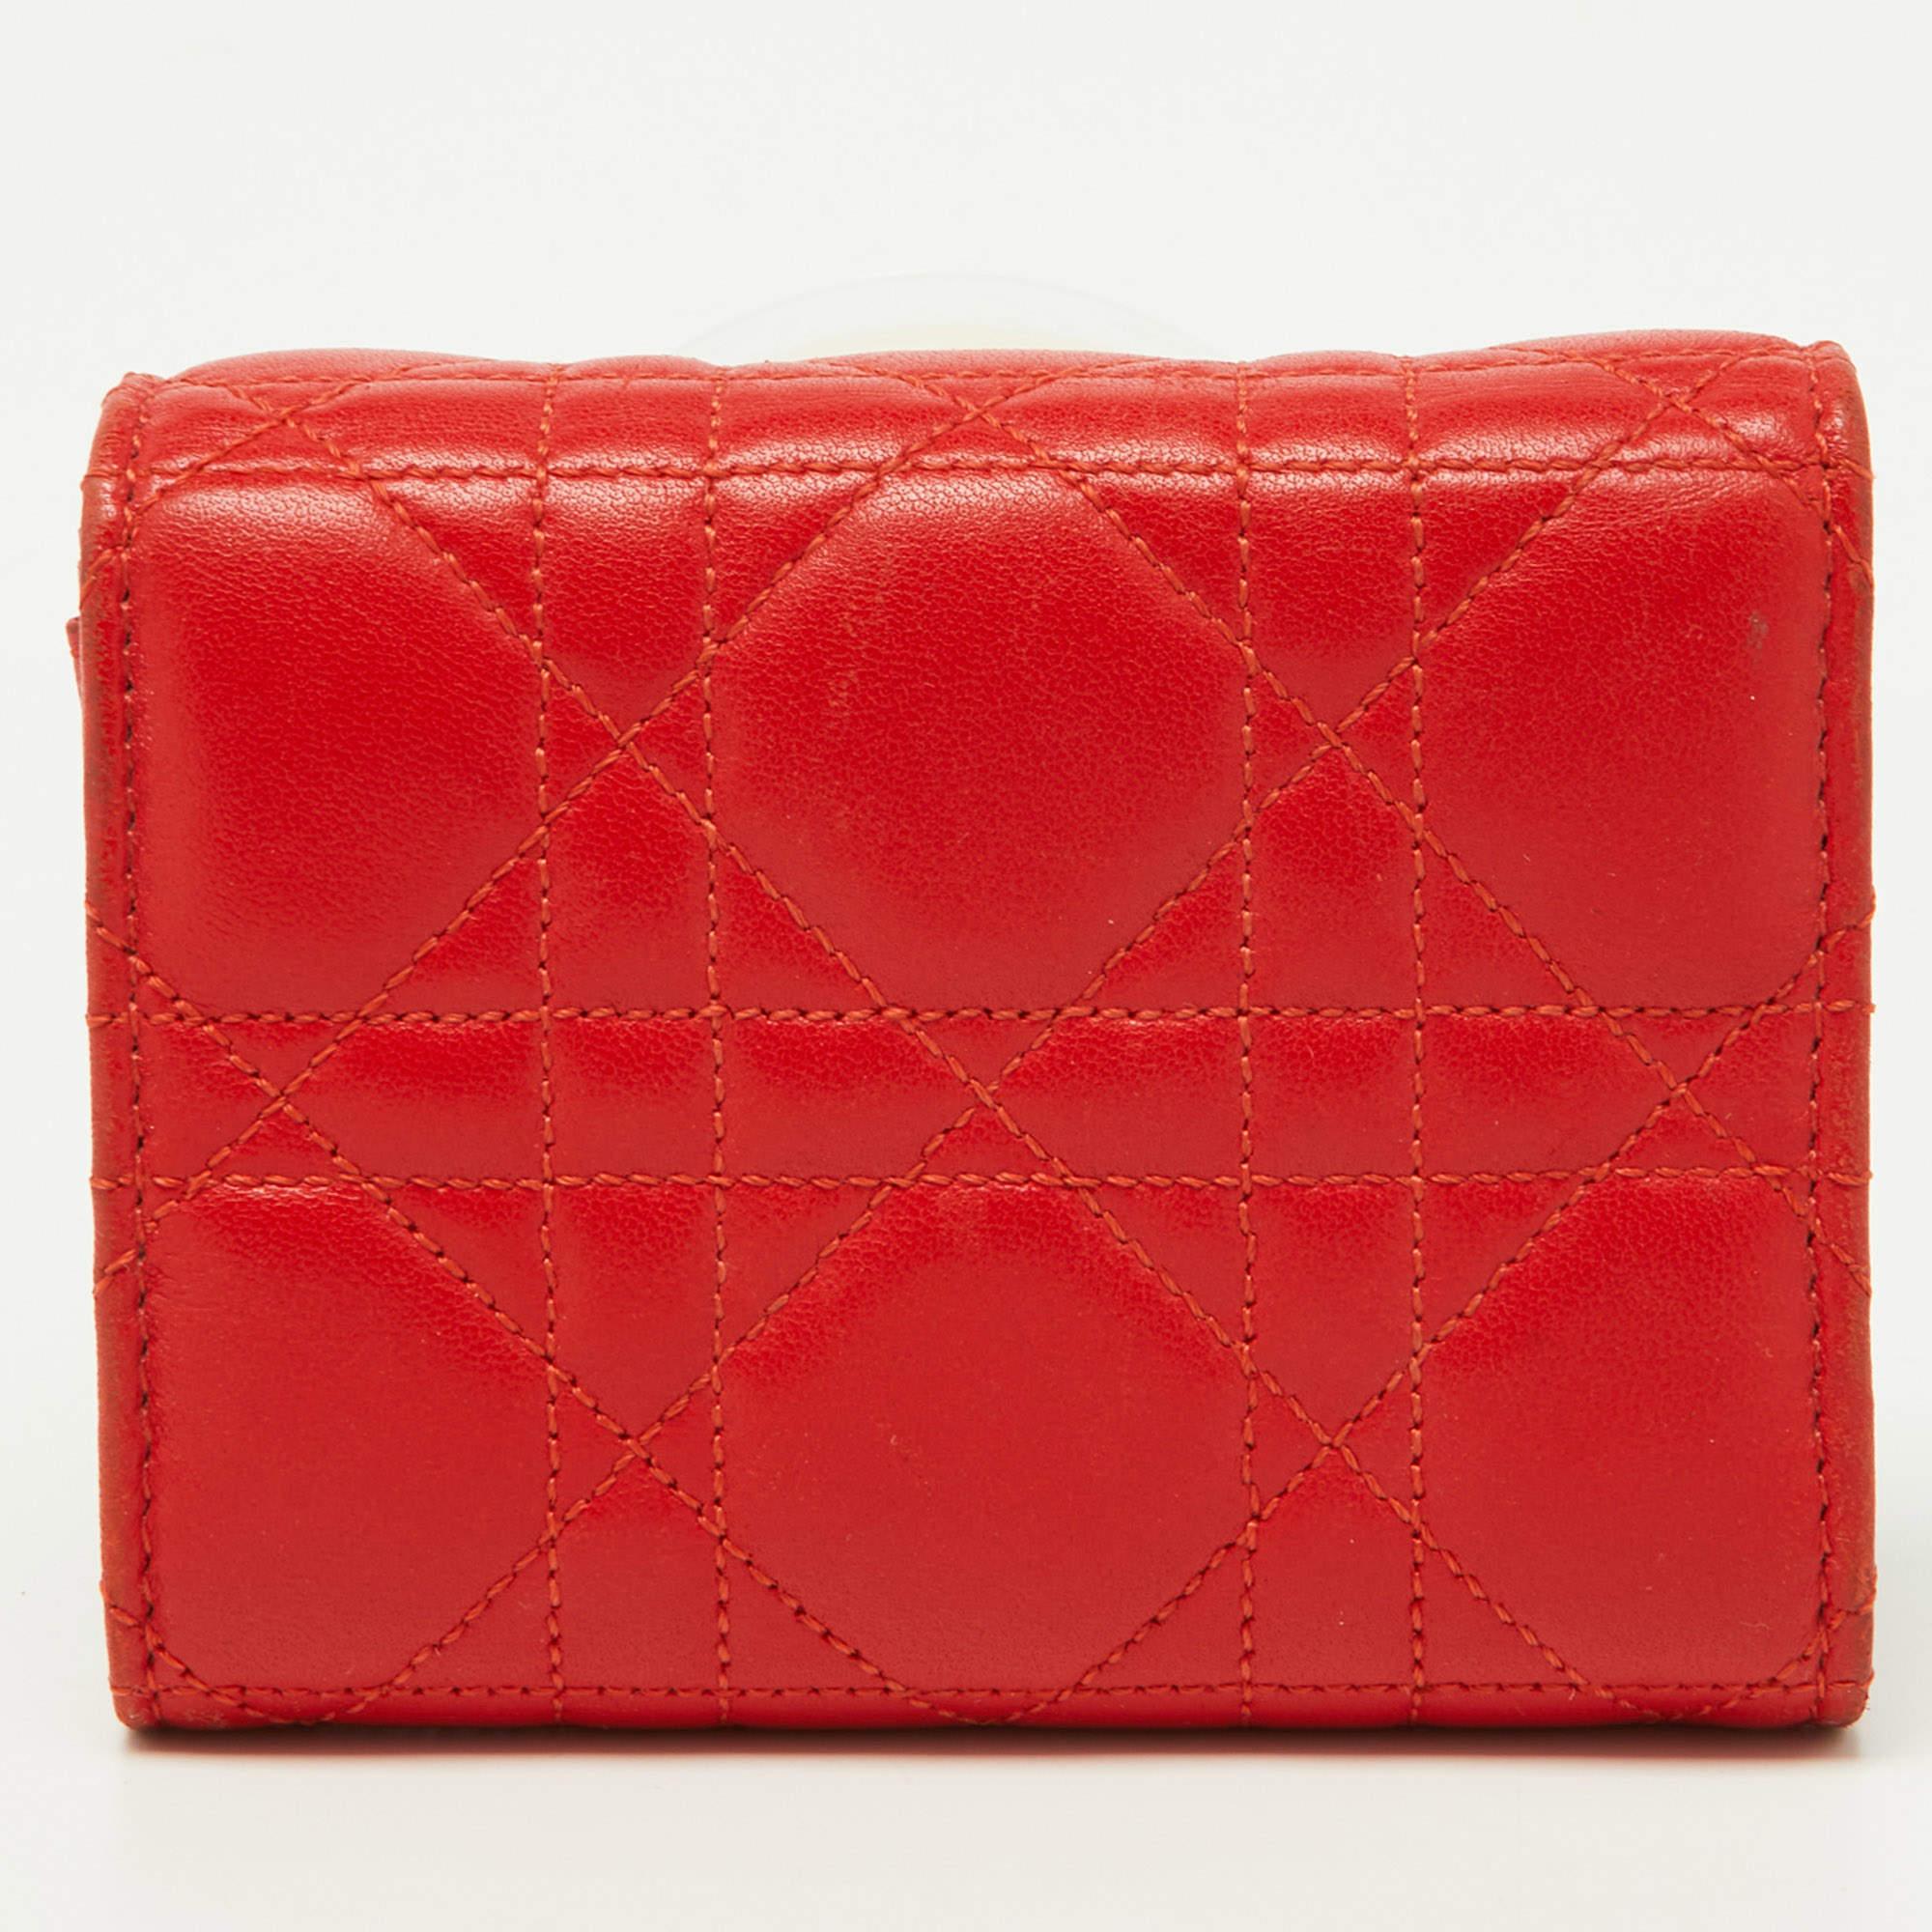 Dior Red Cannage Leather Miss Dior Compact Wallet For Sale 7